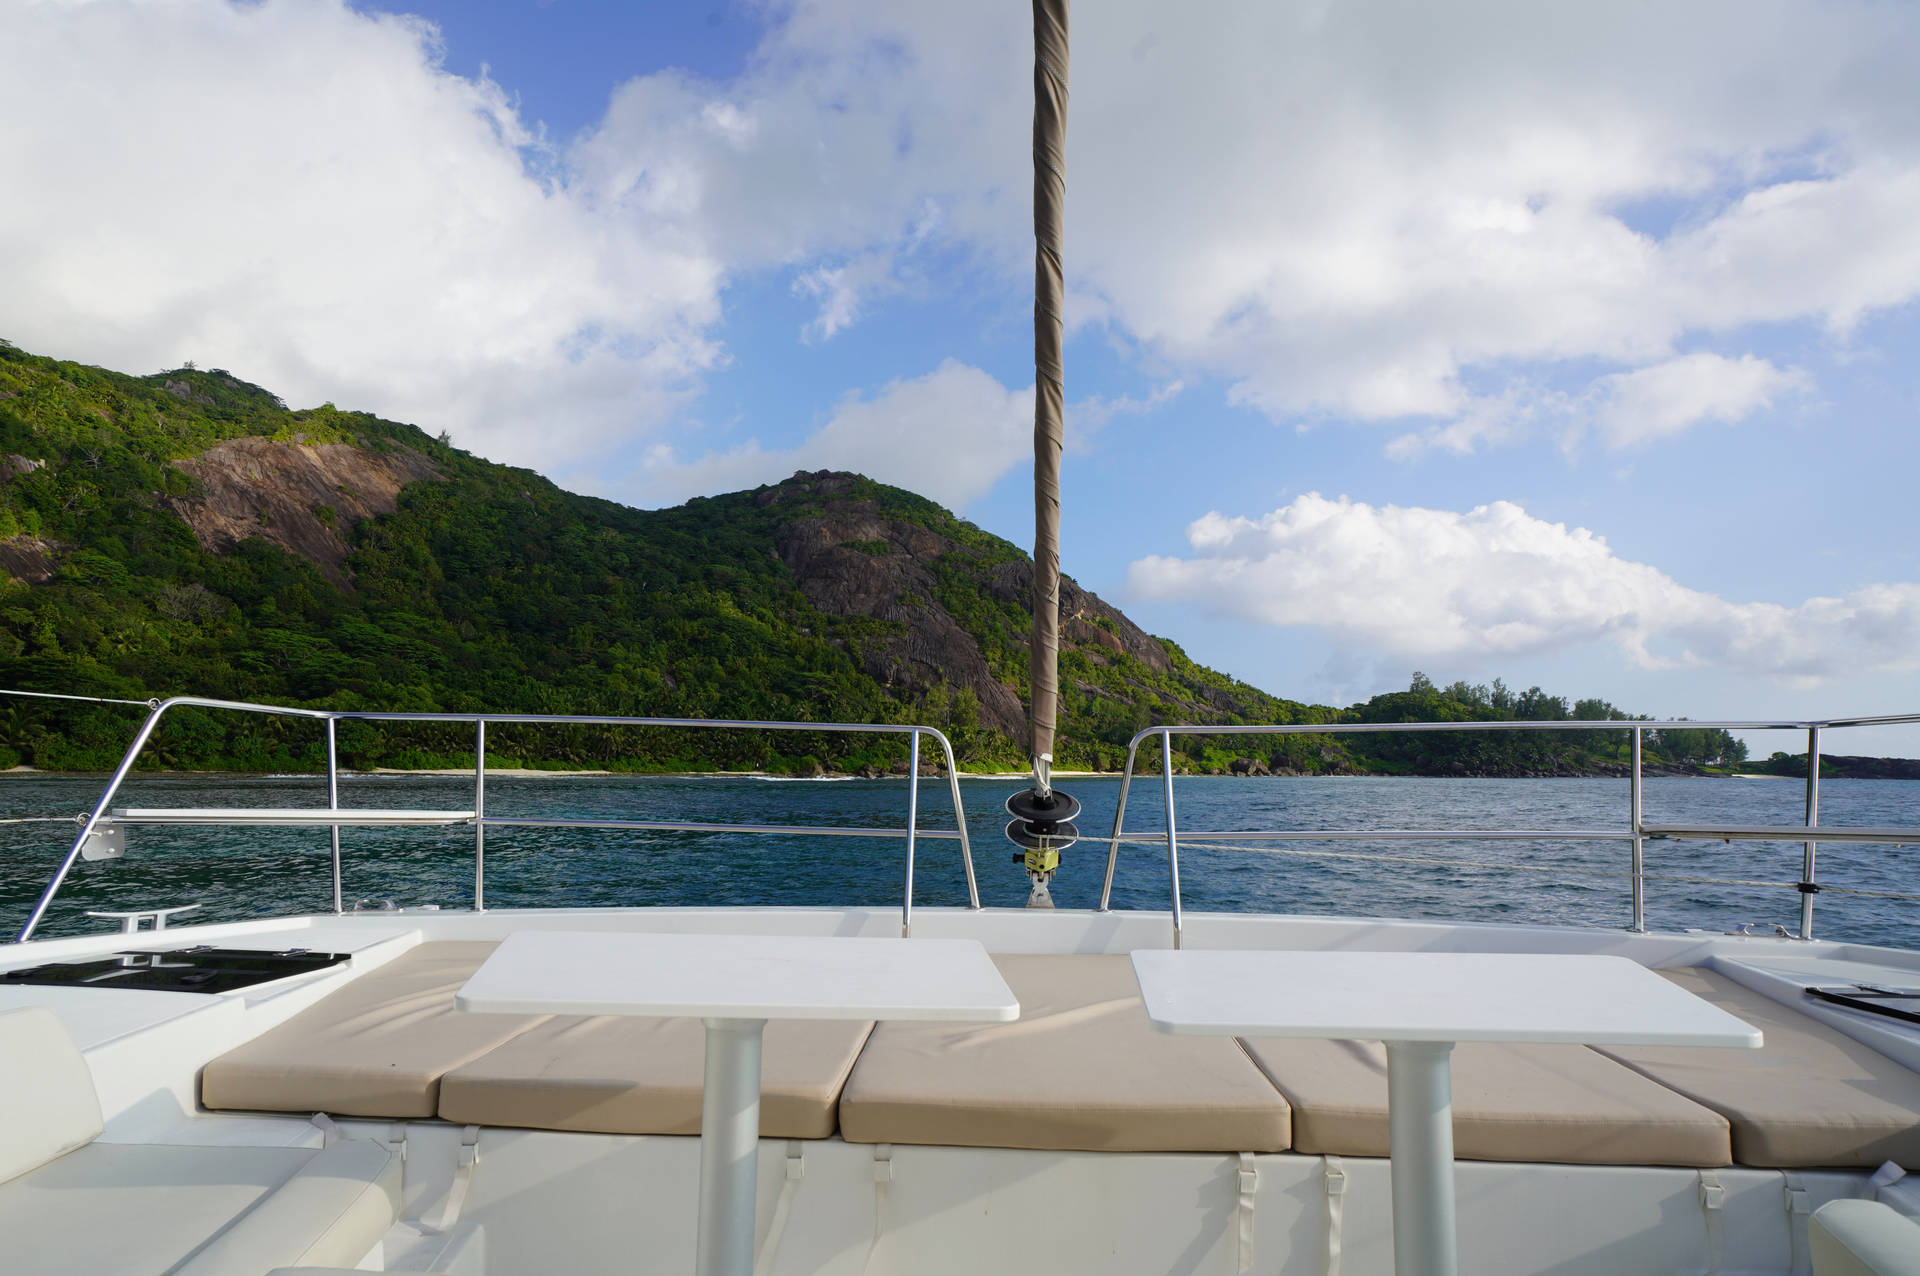 Seychelles Boat Ride Perspective